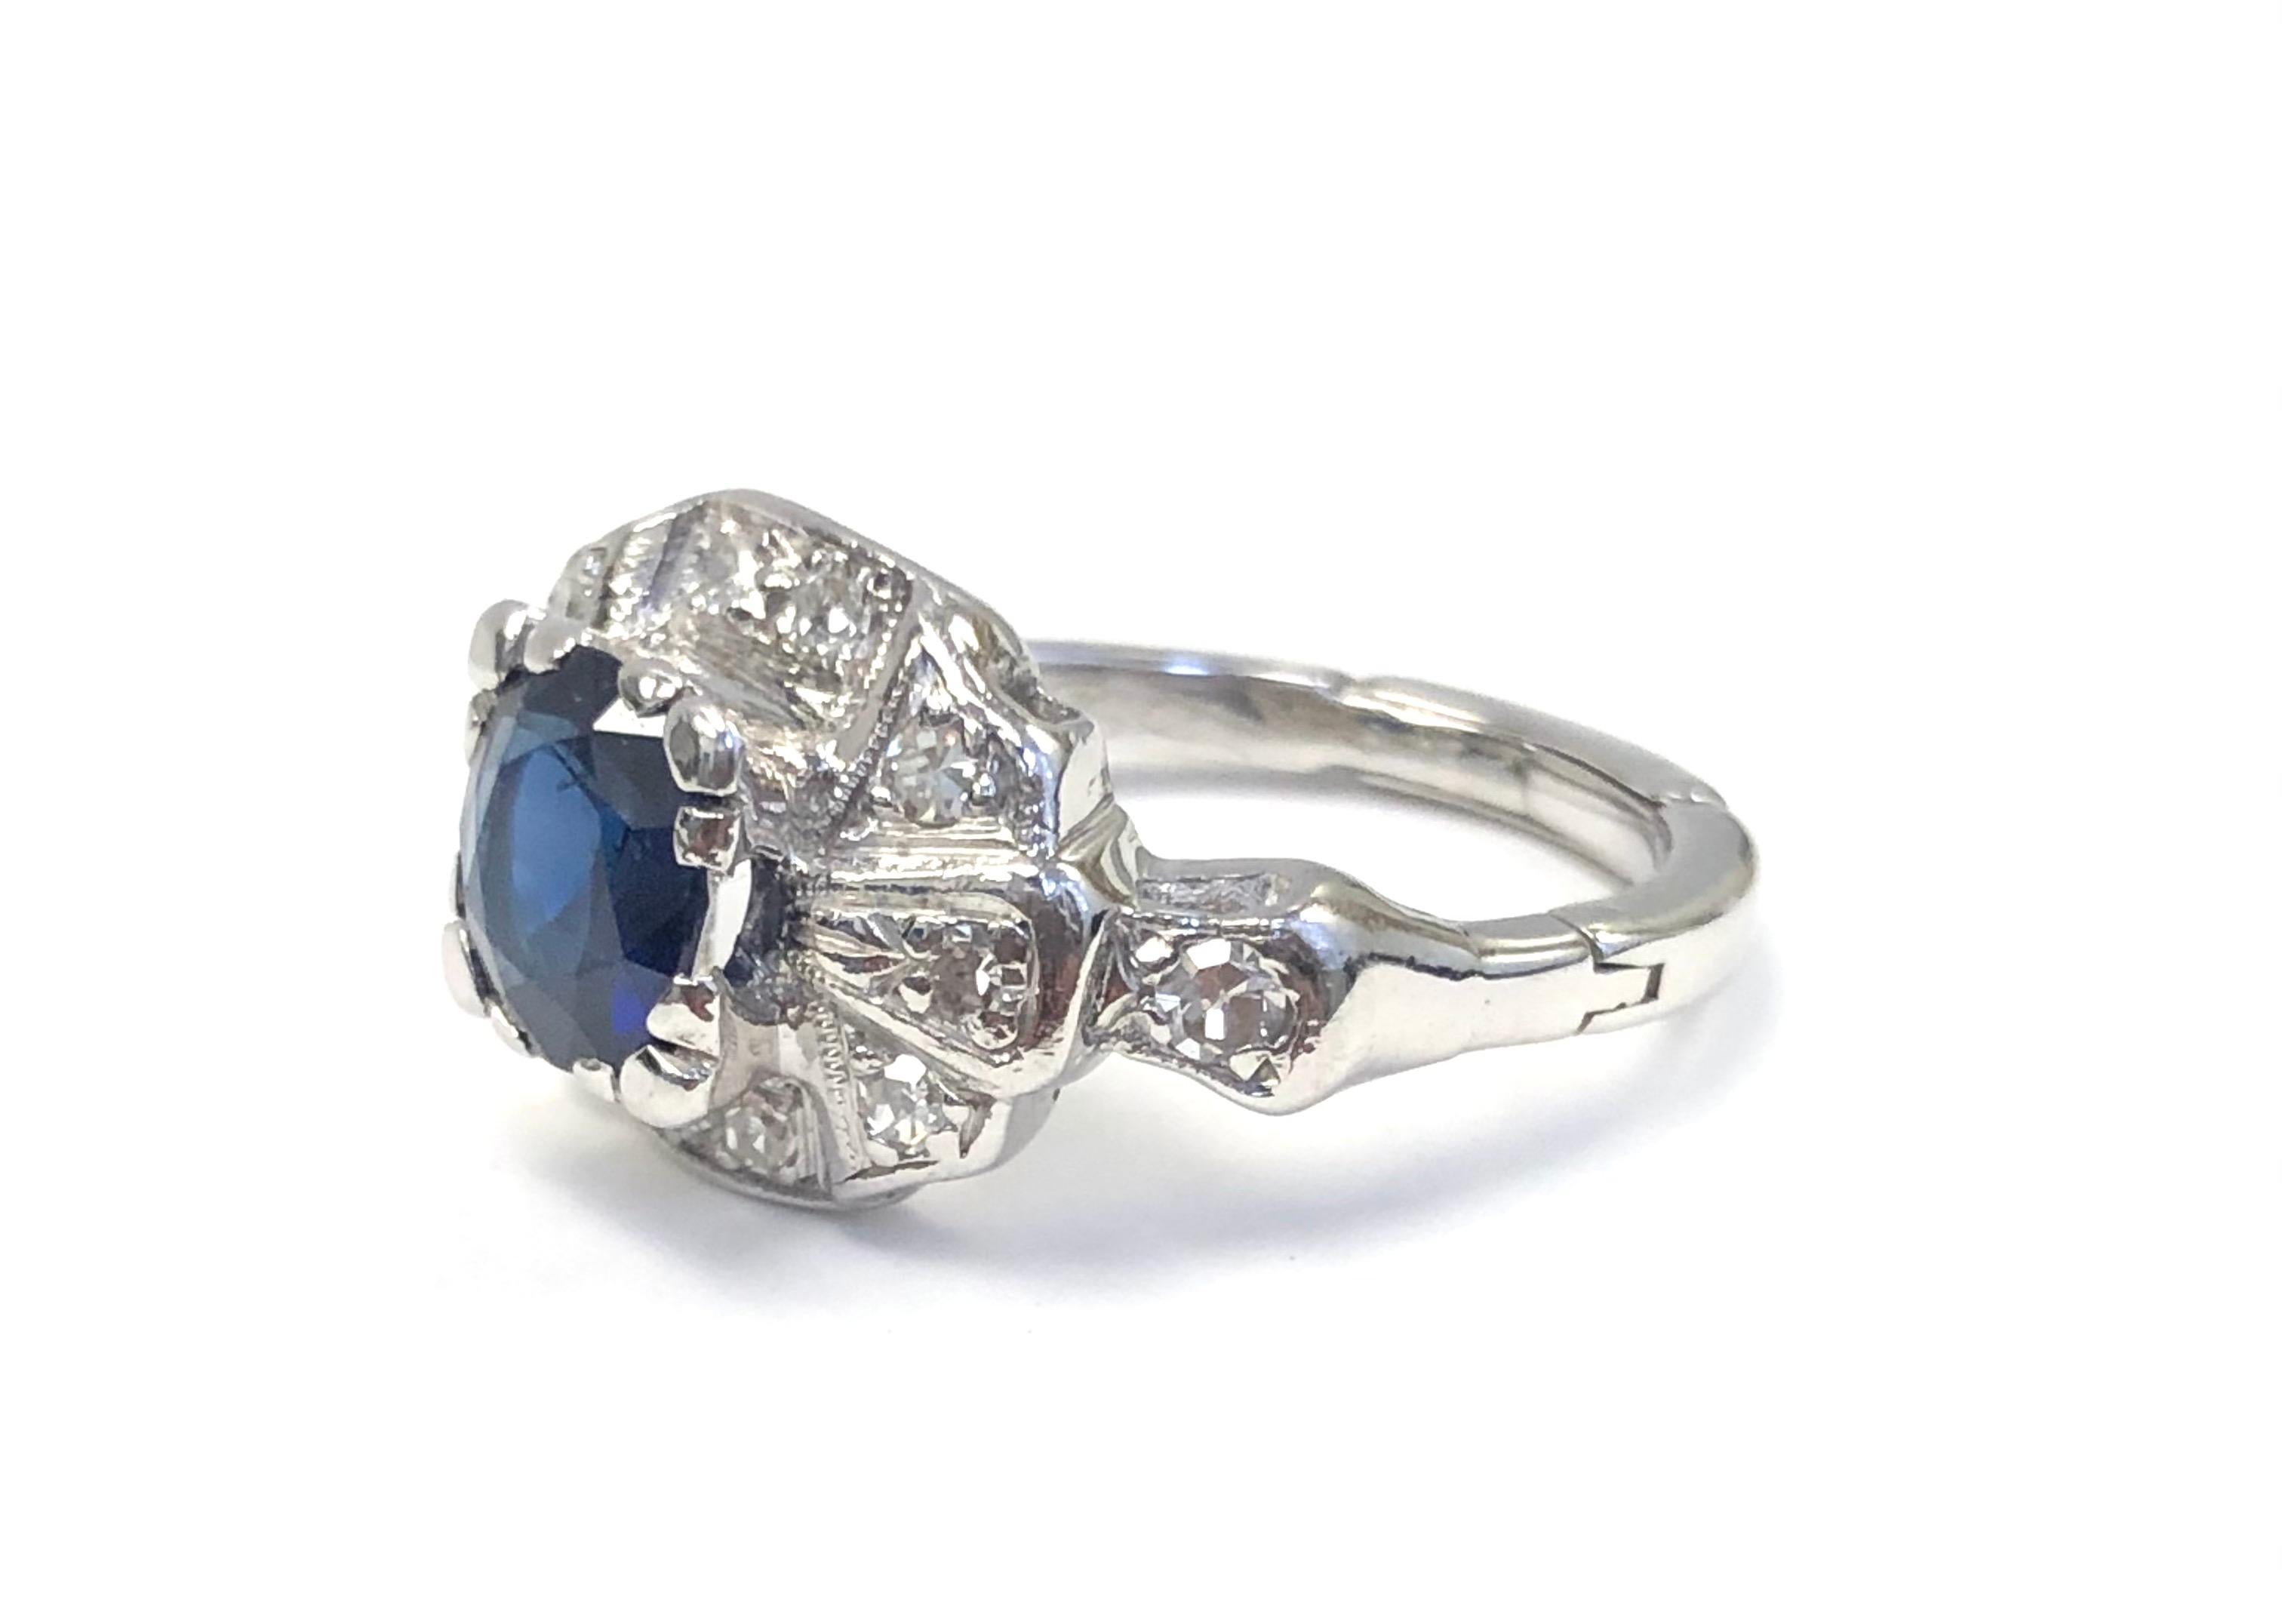 This Deco style Estate ring, is made in 18K White Gold, set with 12 diamonds 0.48 carats and an Oval Burma Sapphire 1.30 carats.
This Ring is fitted with a mechanism that when it is closed it's size 6-3/4 but it opens at the bottom to allow tge ring